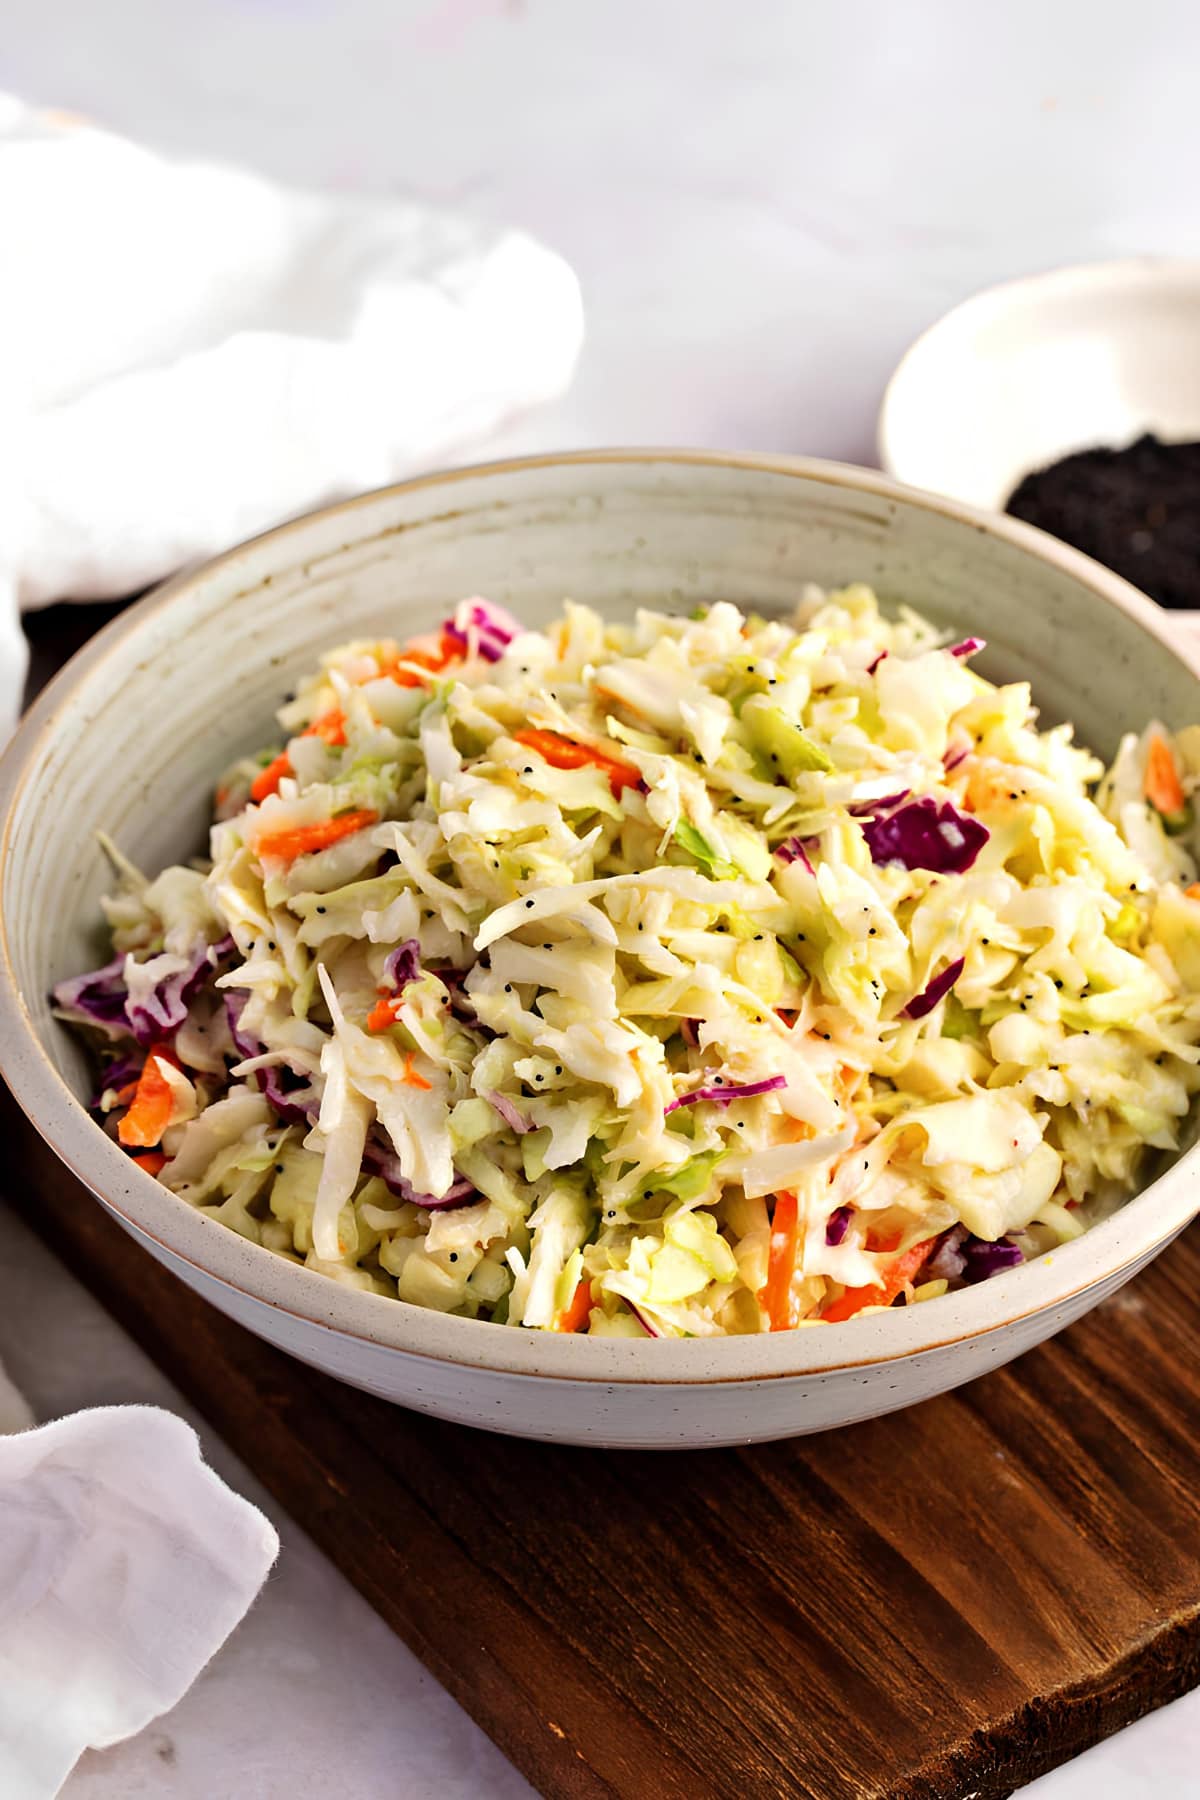 Creamy coleslaw in a bowl.